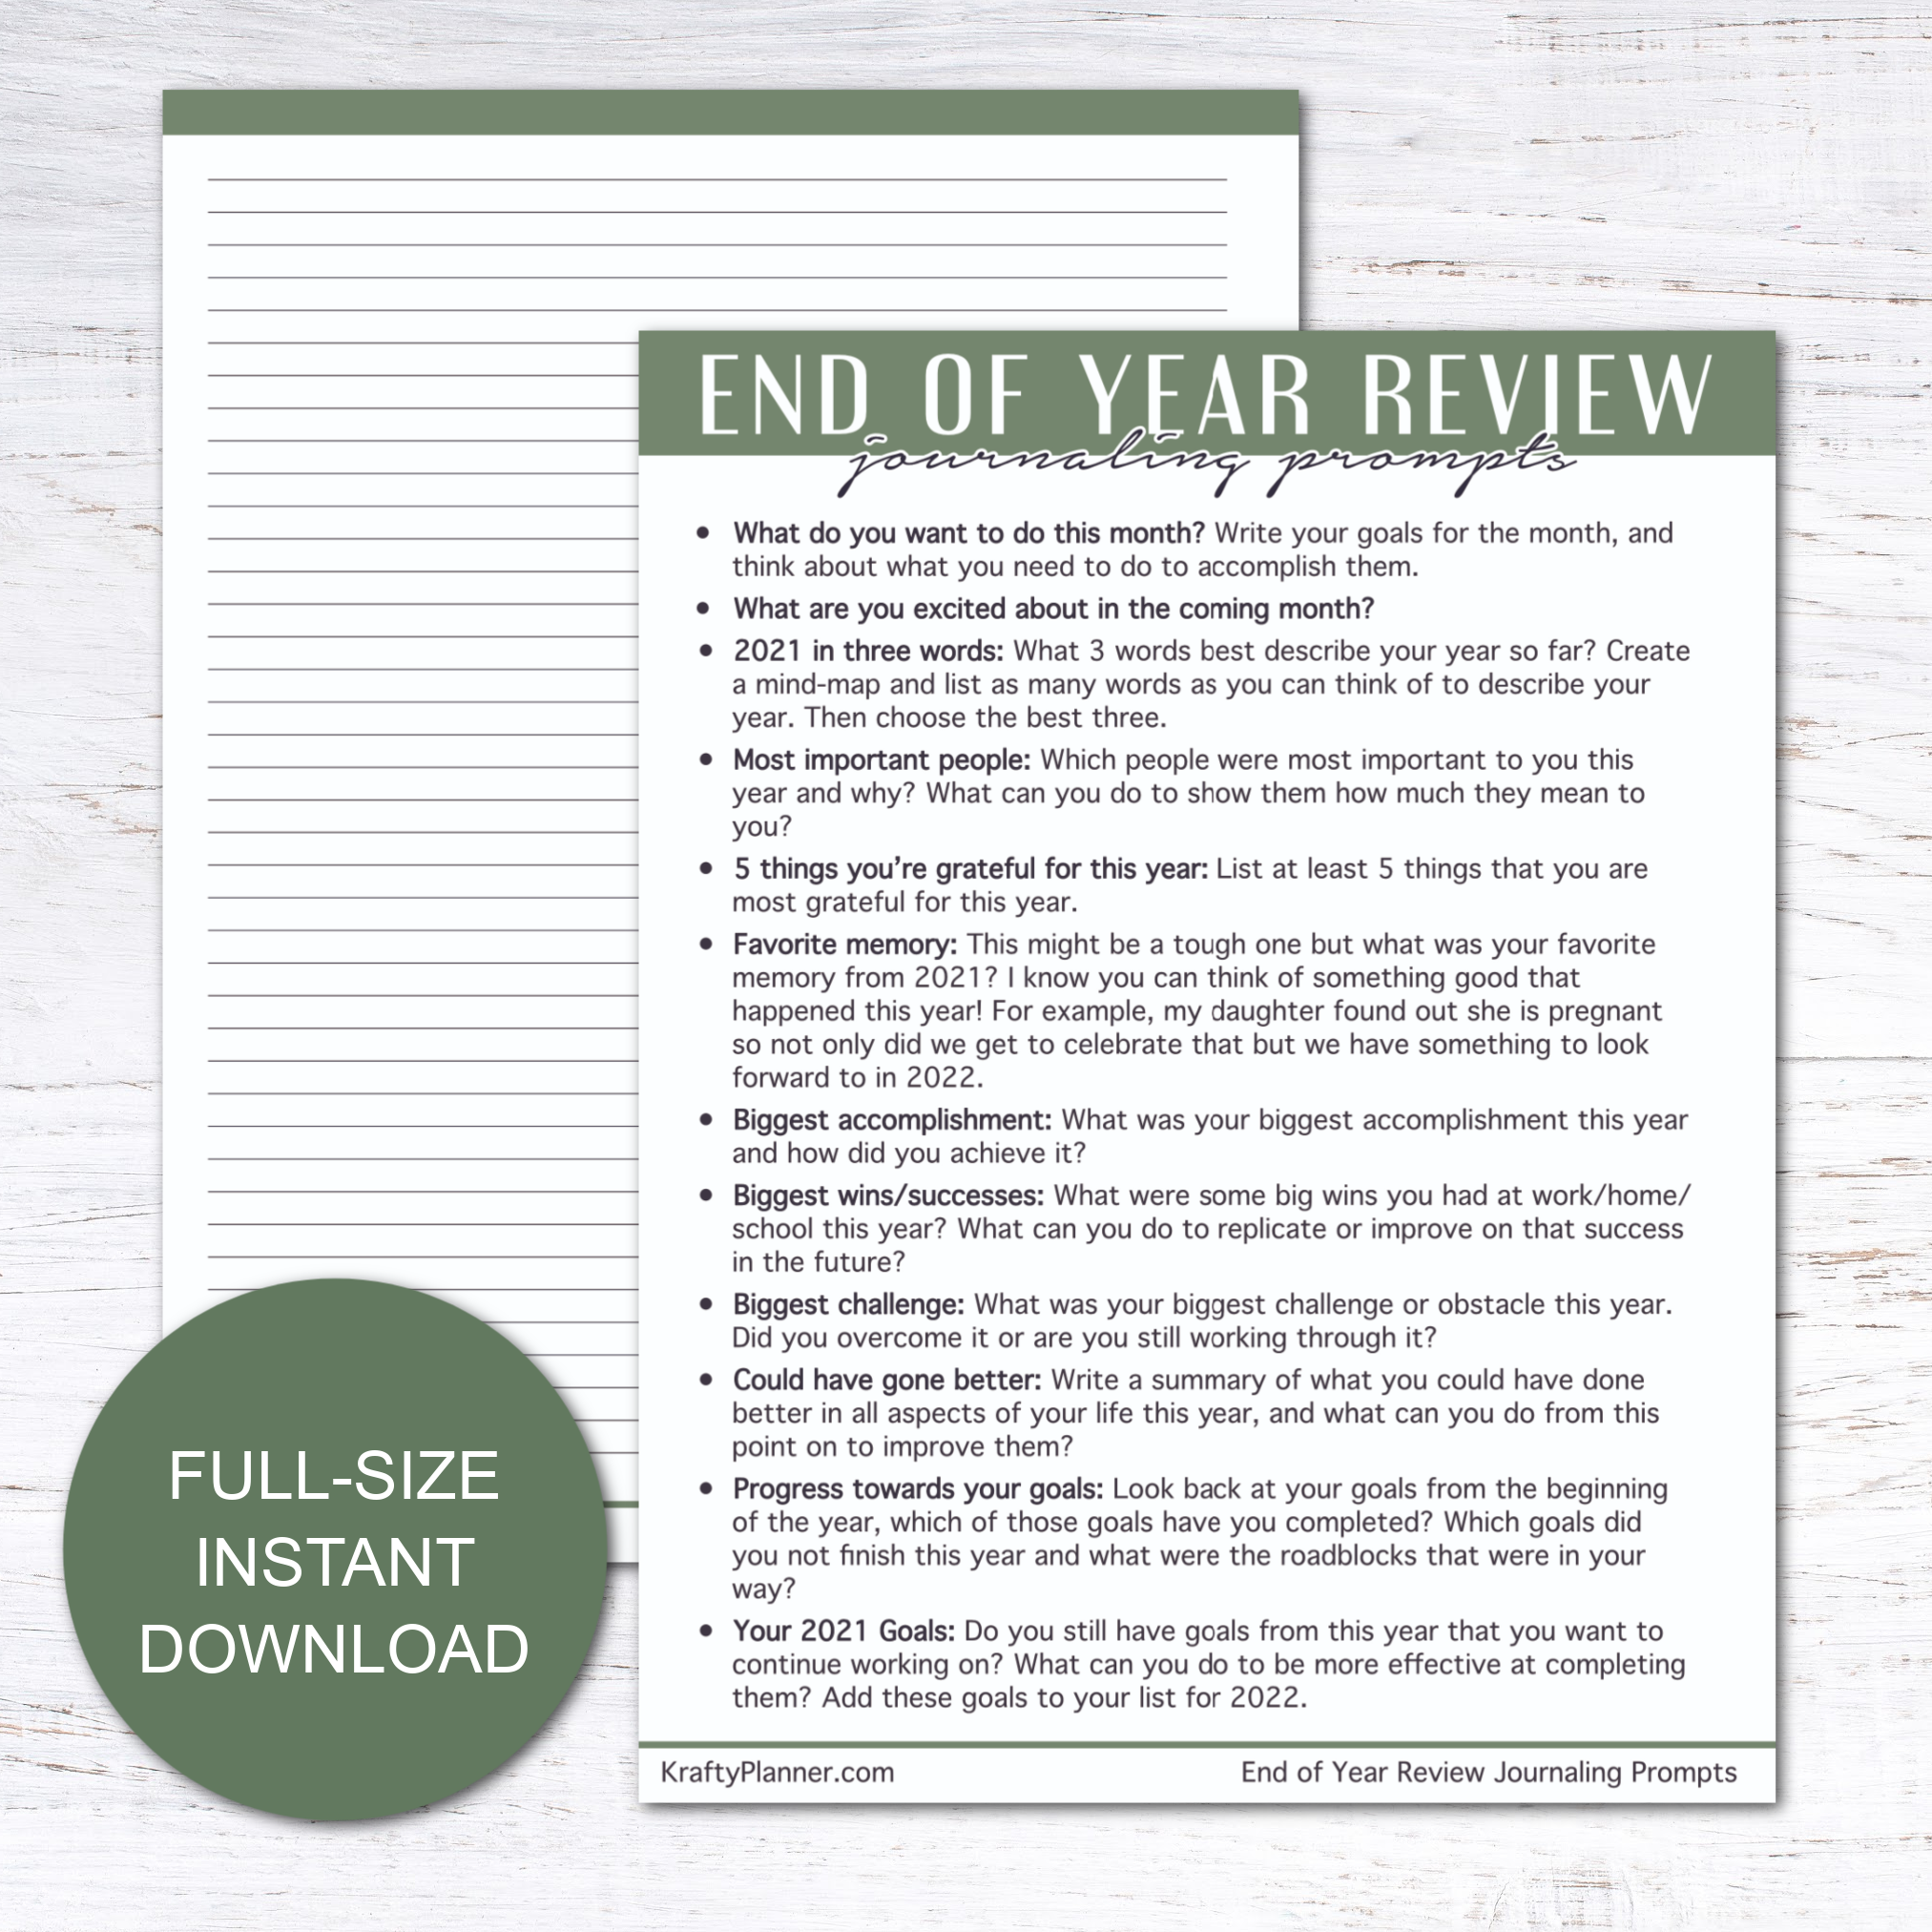 End of Year Review 2021 Journaling Prompts